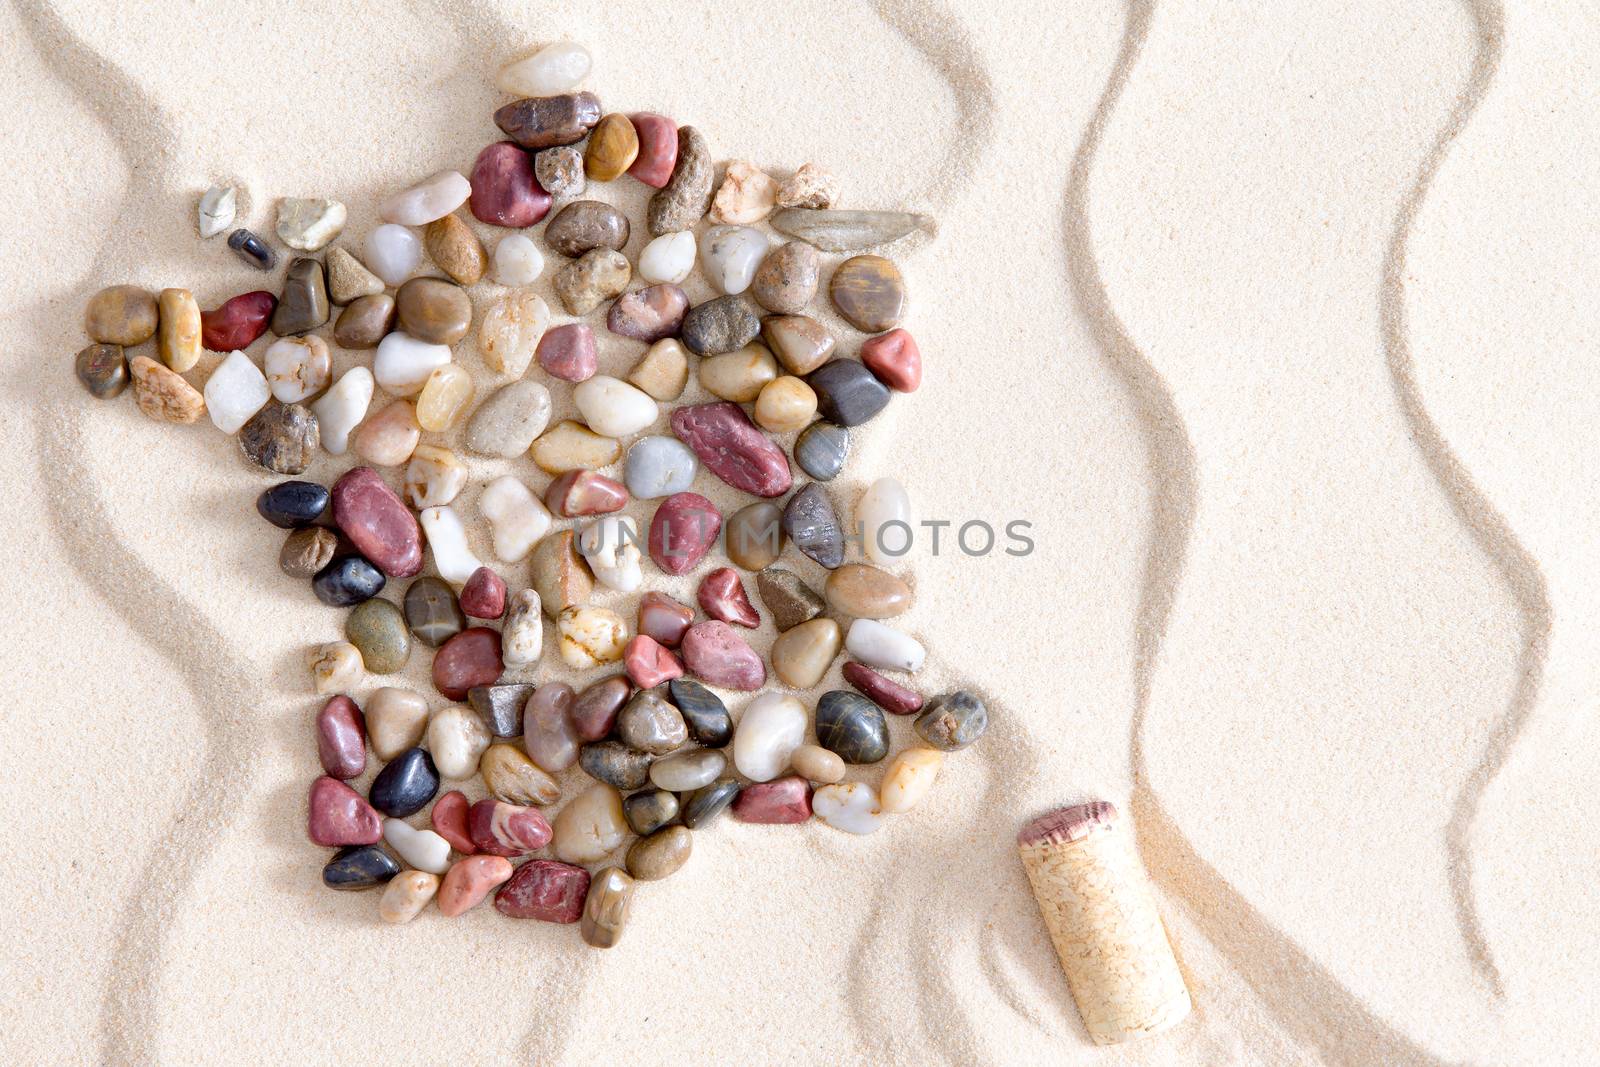 Artistic map of France from colorful waterworn pebbles arranged on decorative white sand with a pattern of wavy lines with Corsica island formed by a wine bottle cork, copy space in a conceptual image